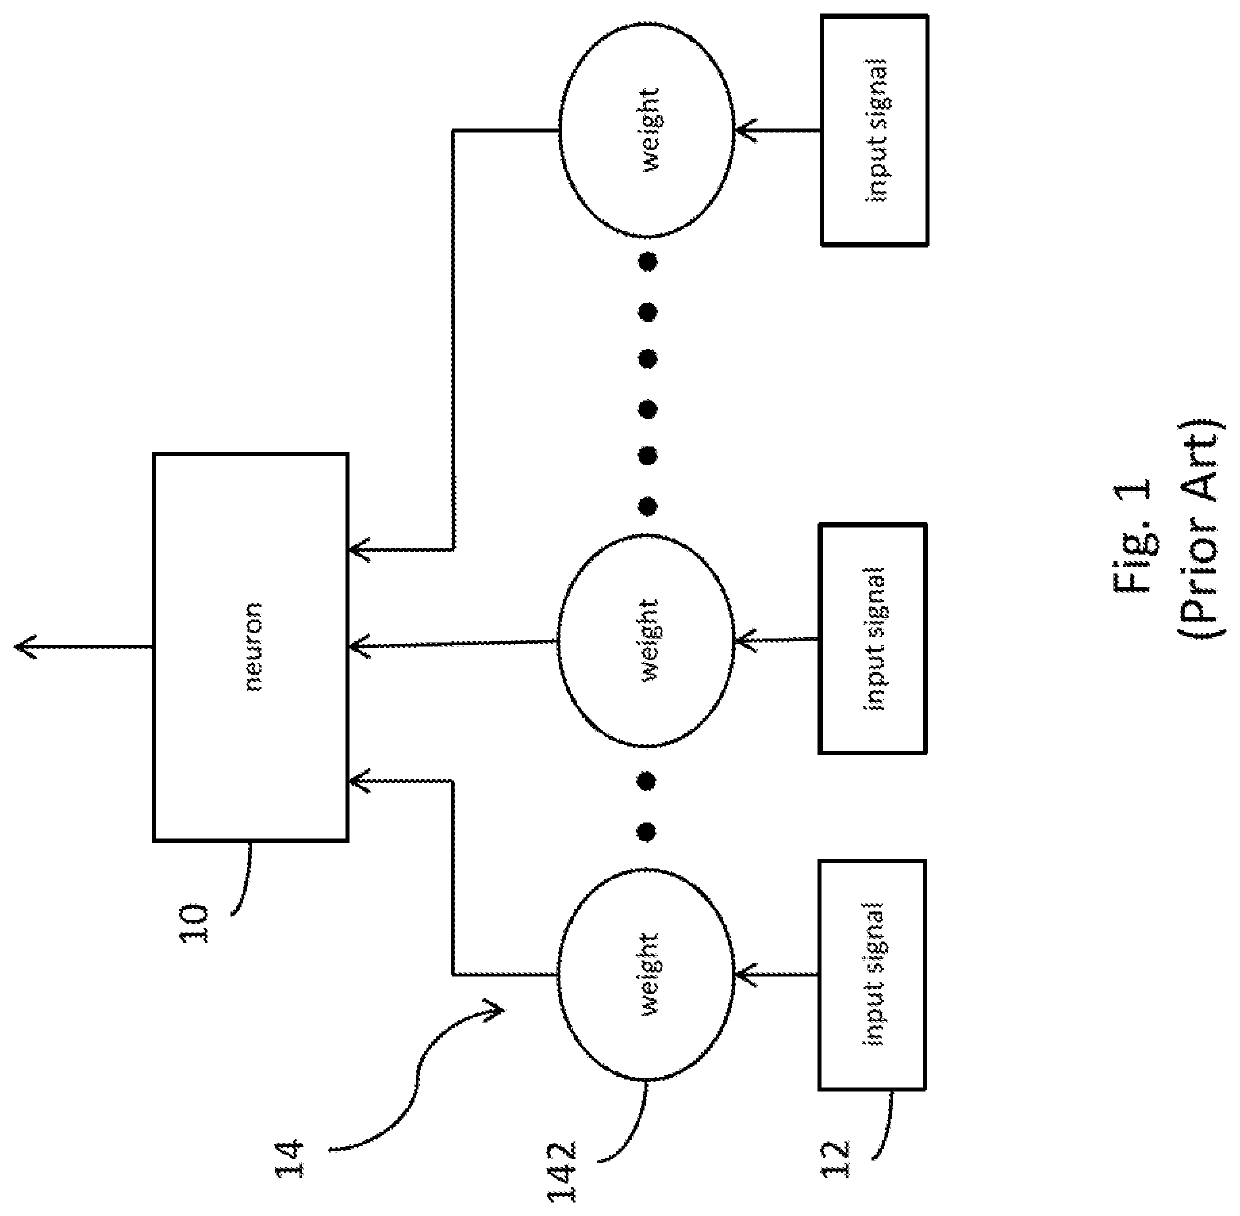 Neural network processing system